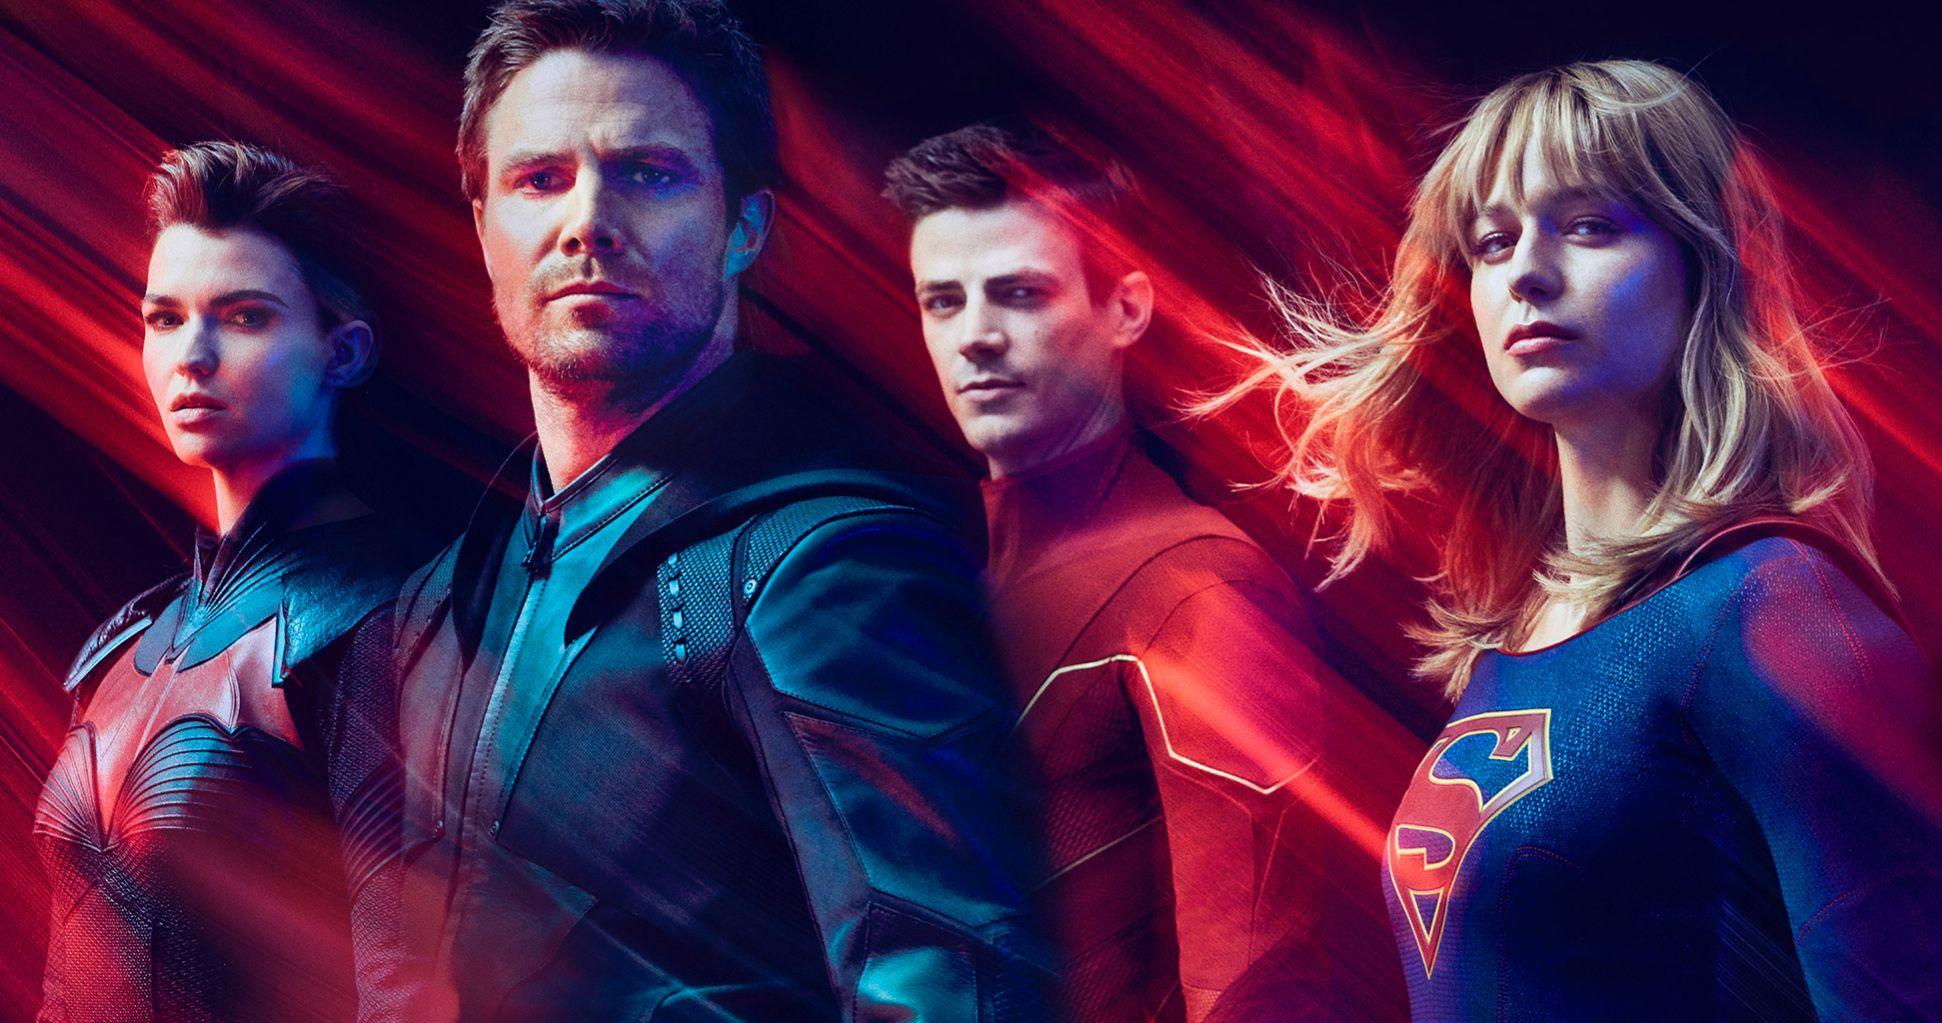 ArrowVerse' Crossover 'Crisis on Infinite Earths' Premiere